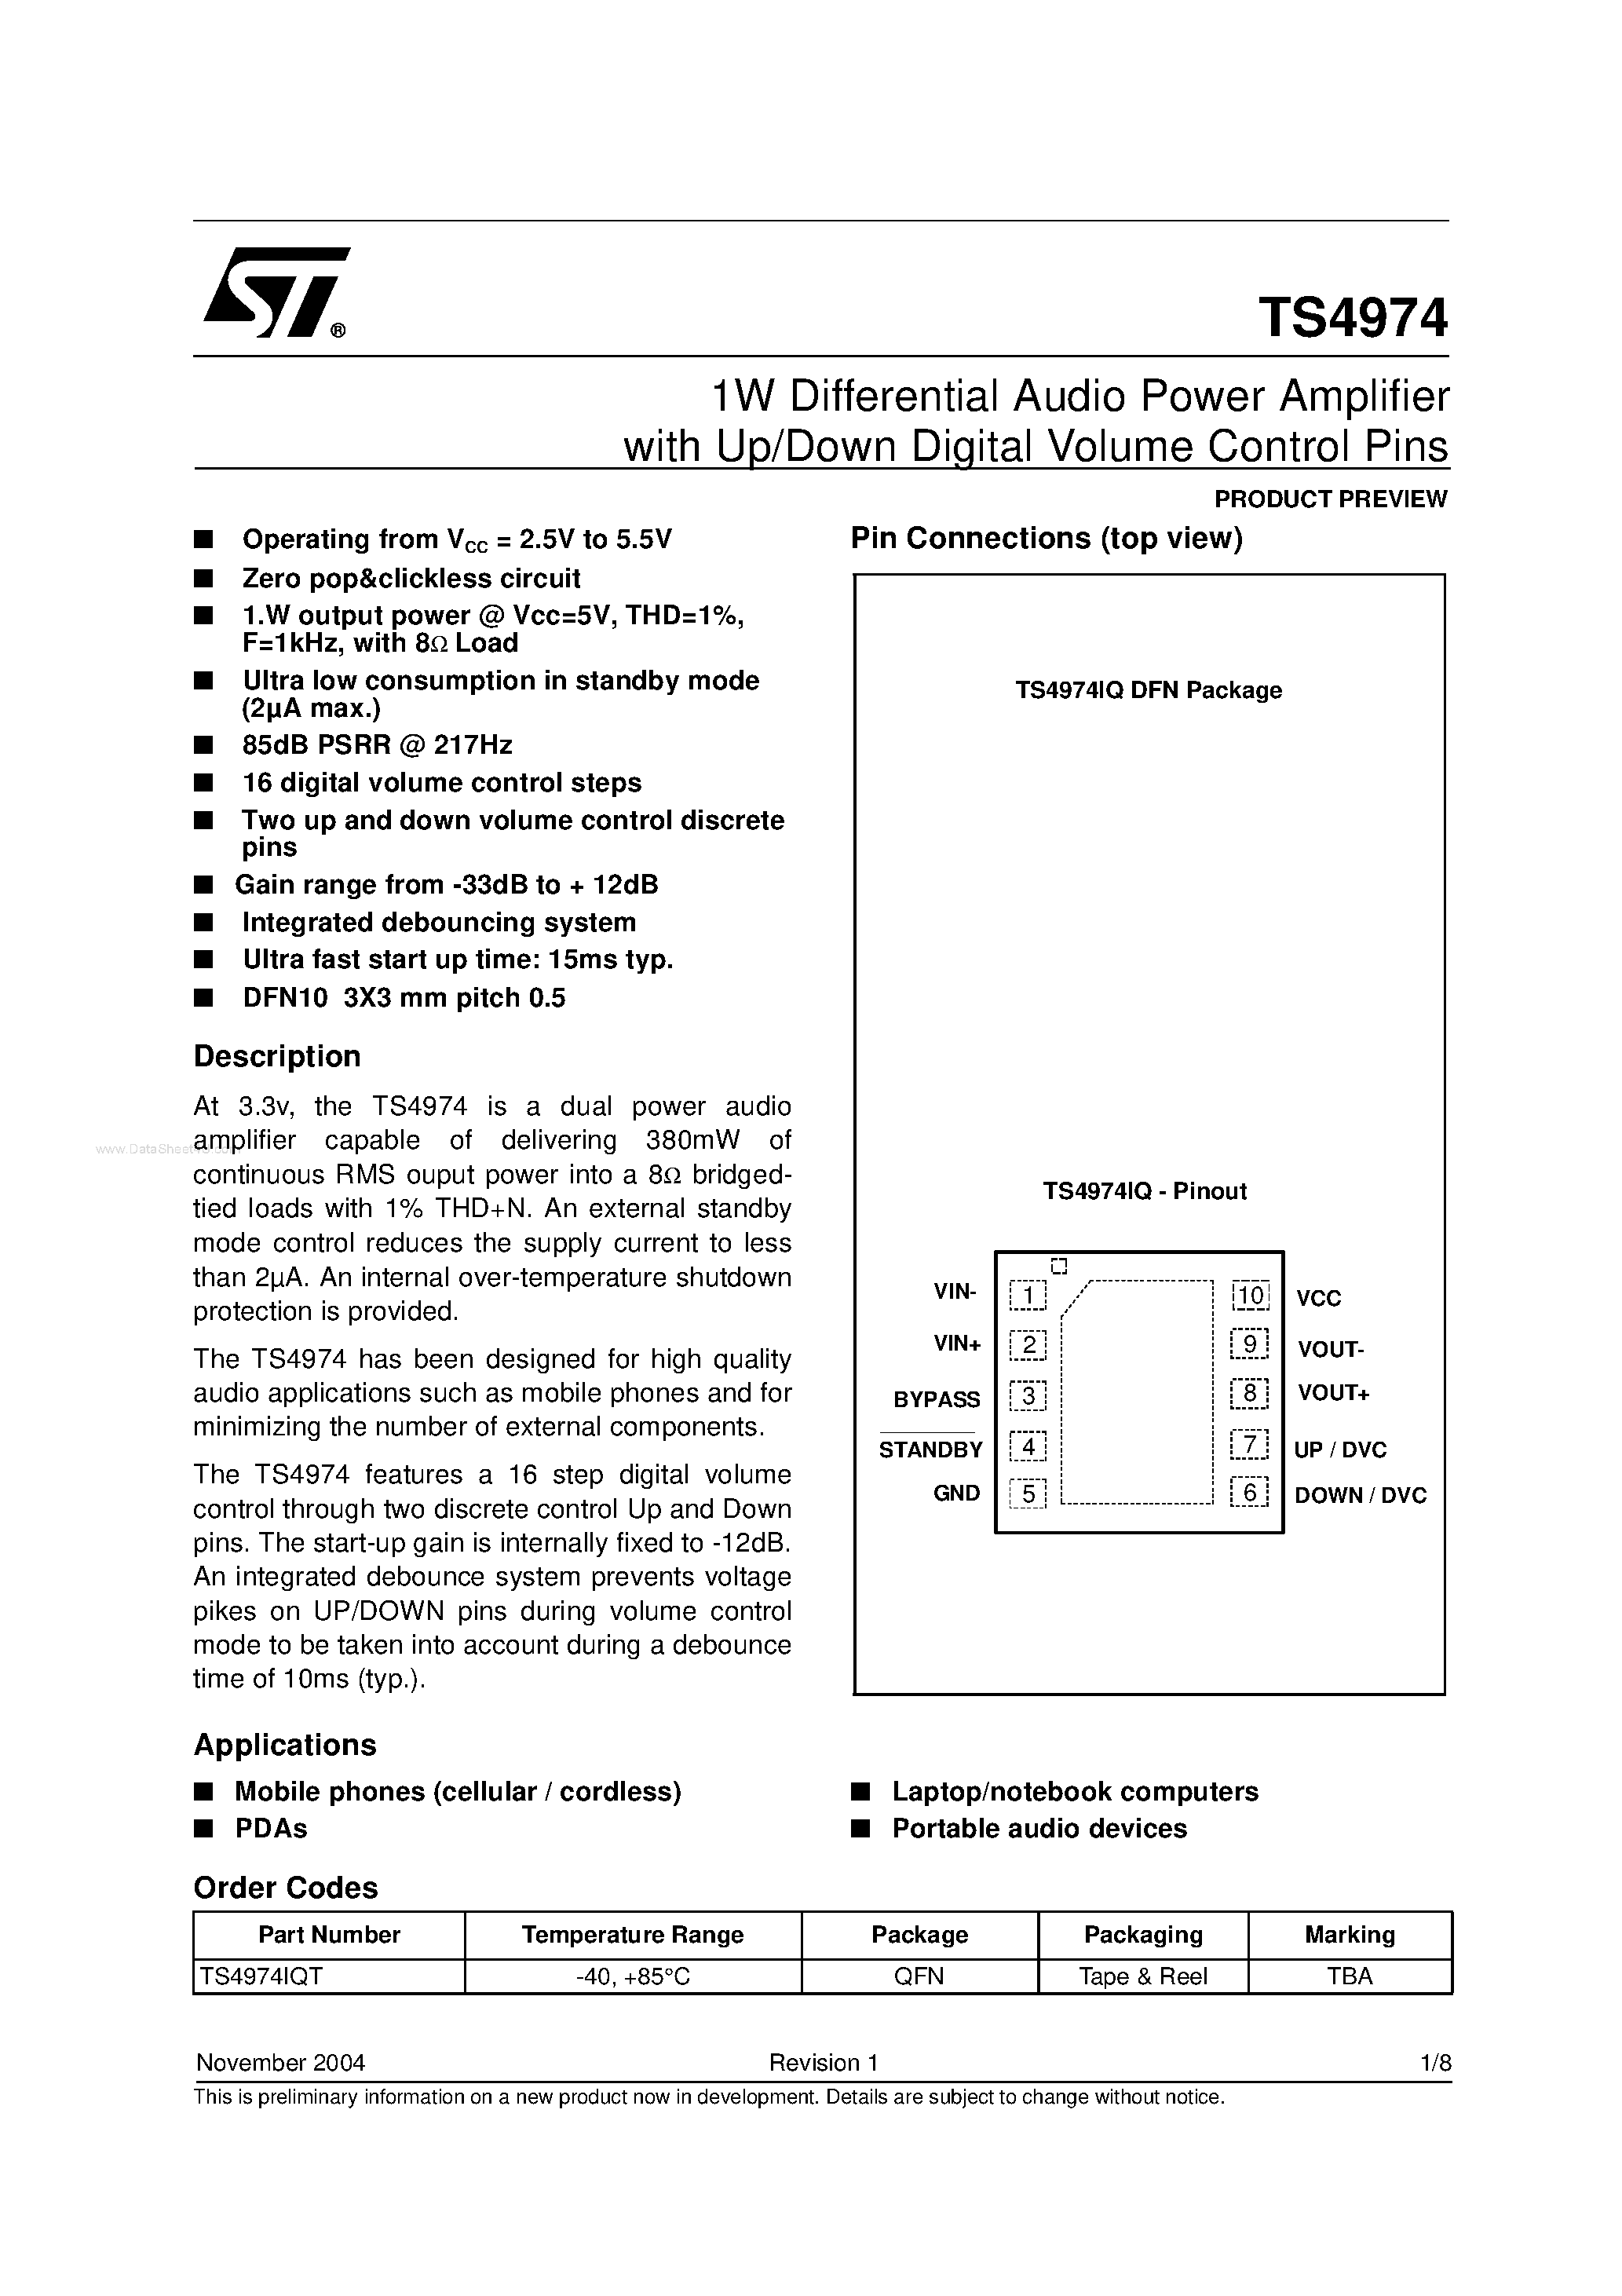 Даташит TS4974 - 1W Differential Audio Power Amplifier страница 1